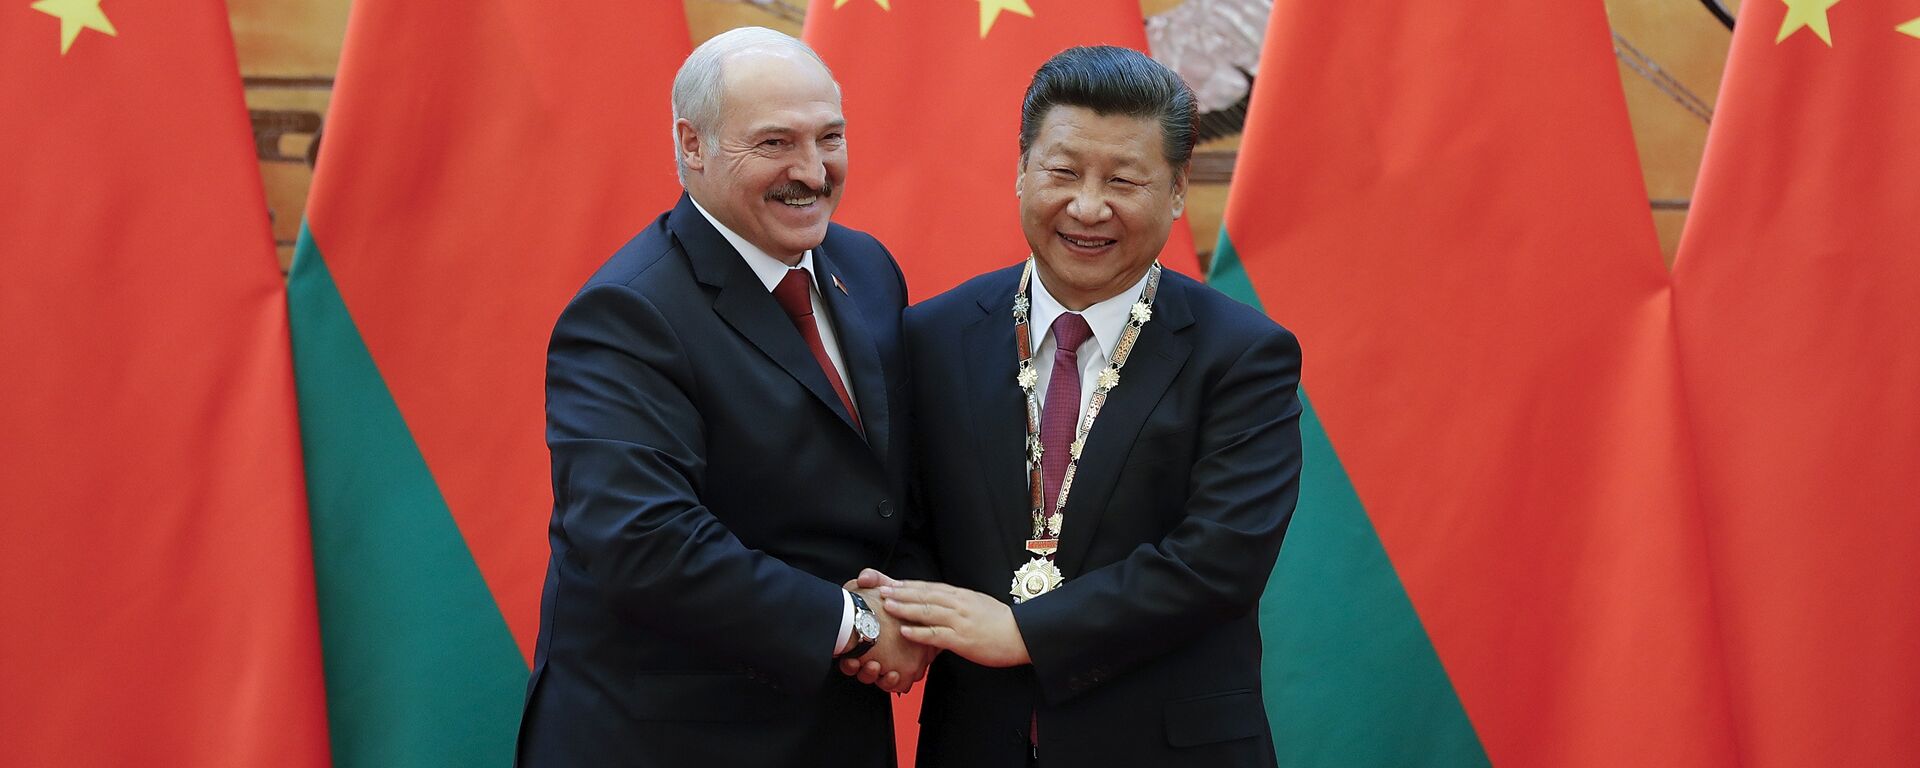 Chinese President Xi Jinping (R) shakes hands with Belarus' President Alexander Lukashenko after being awarding the Belarus peace and friendship medal at the Great Hall of the People in Beijing on September 29, 2016 - Sputnik International, 1920, 01.10.2022